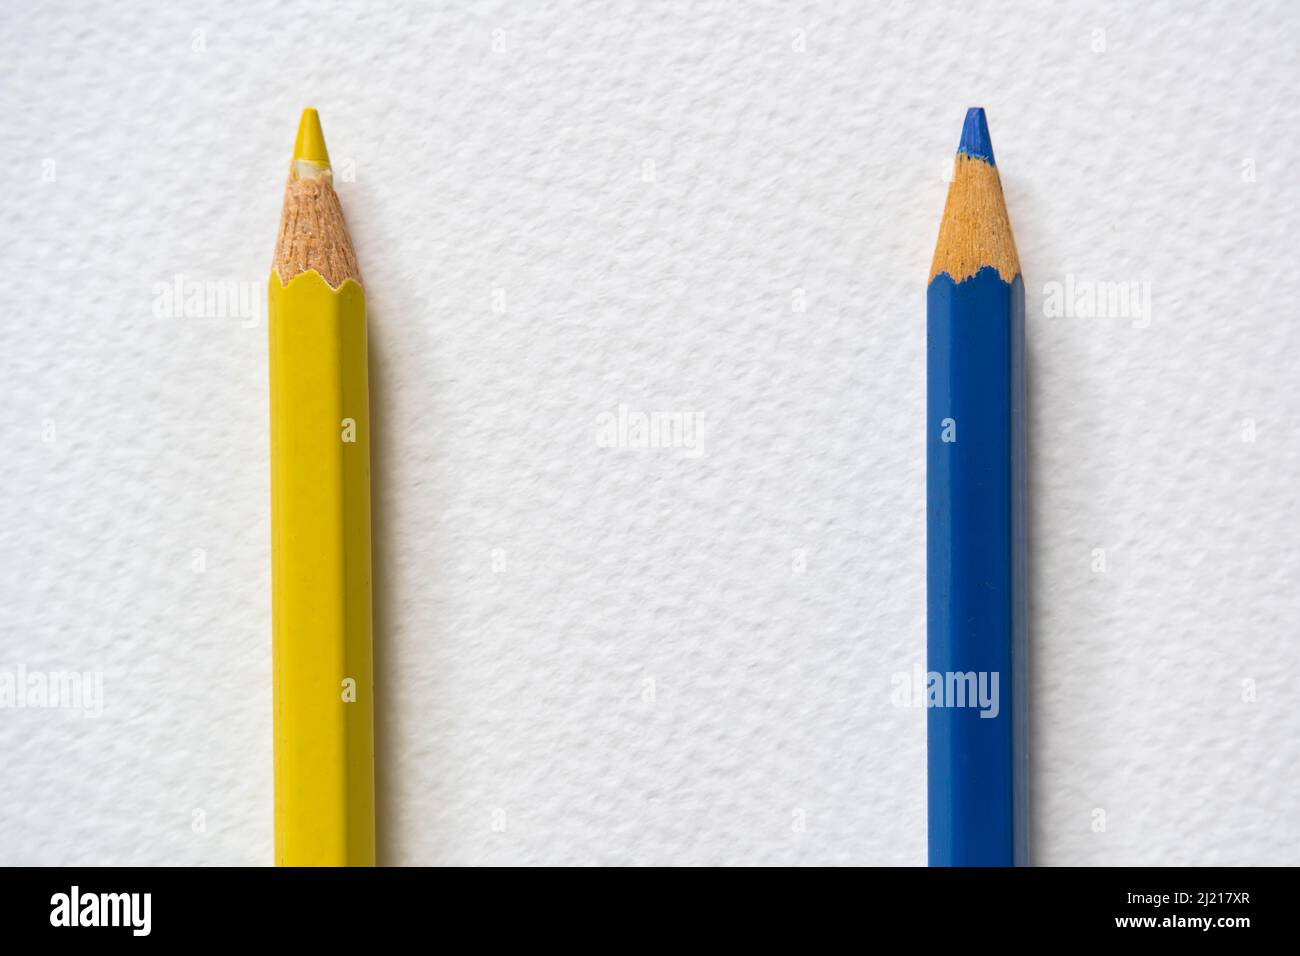 Blue and yellow colored pencils on rough paper. Blue and yellow are colors of Ukraine national flag. Stock Photo